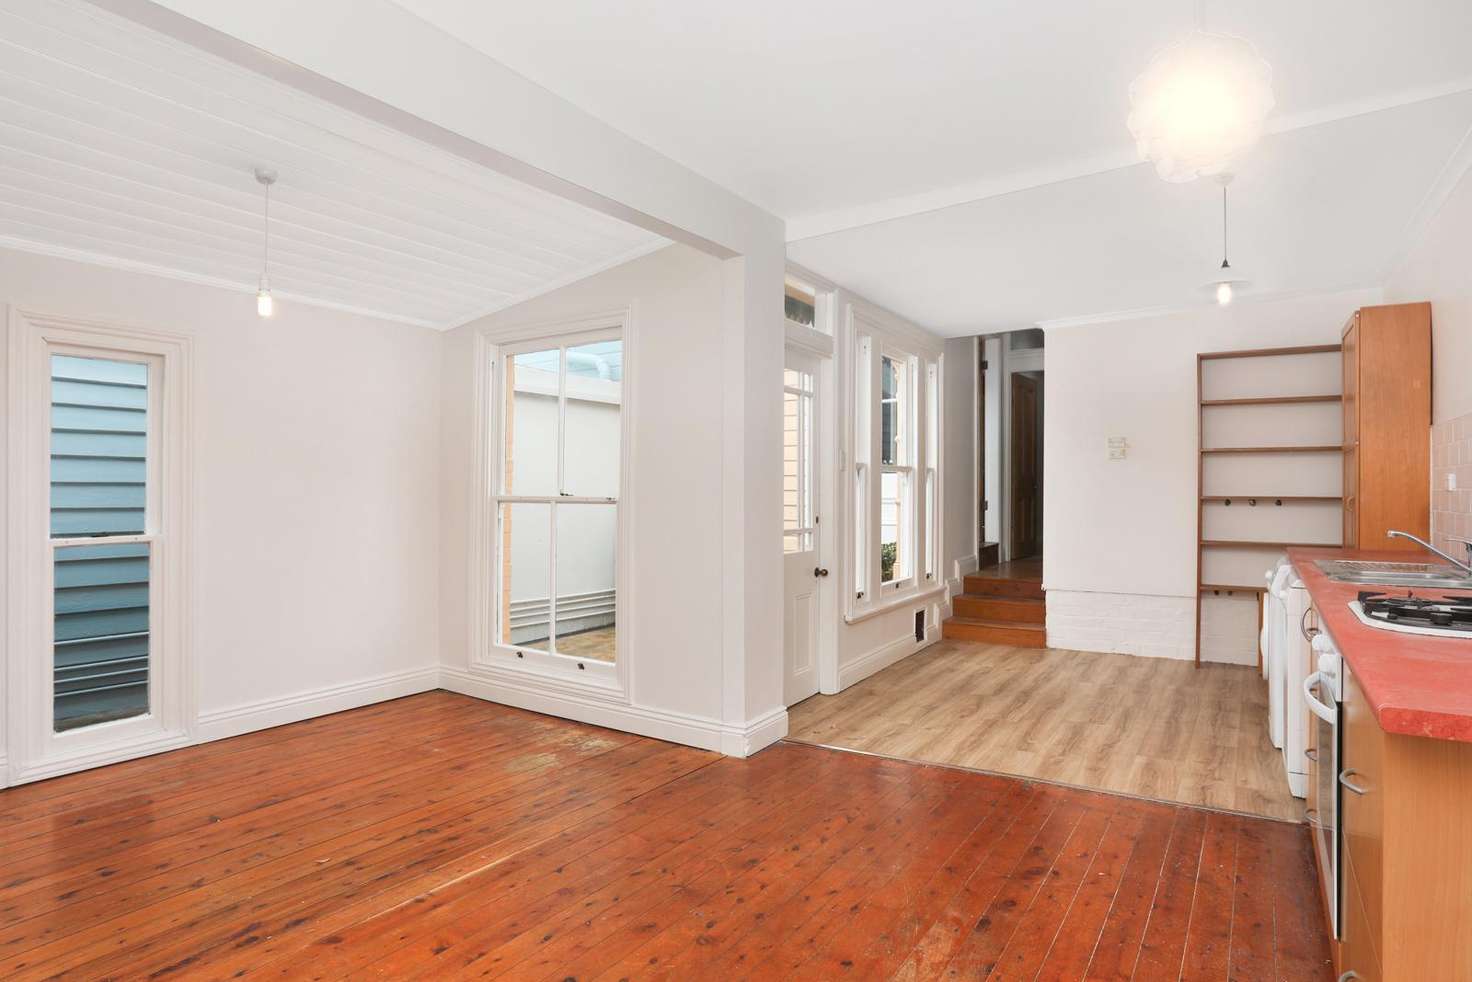 Main view of Homely apartment listing, 36 Pashley Street, Balmain NSW 2041